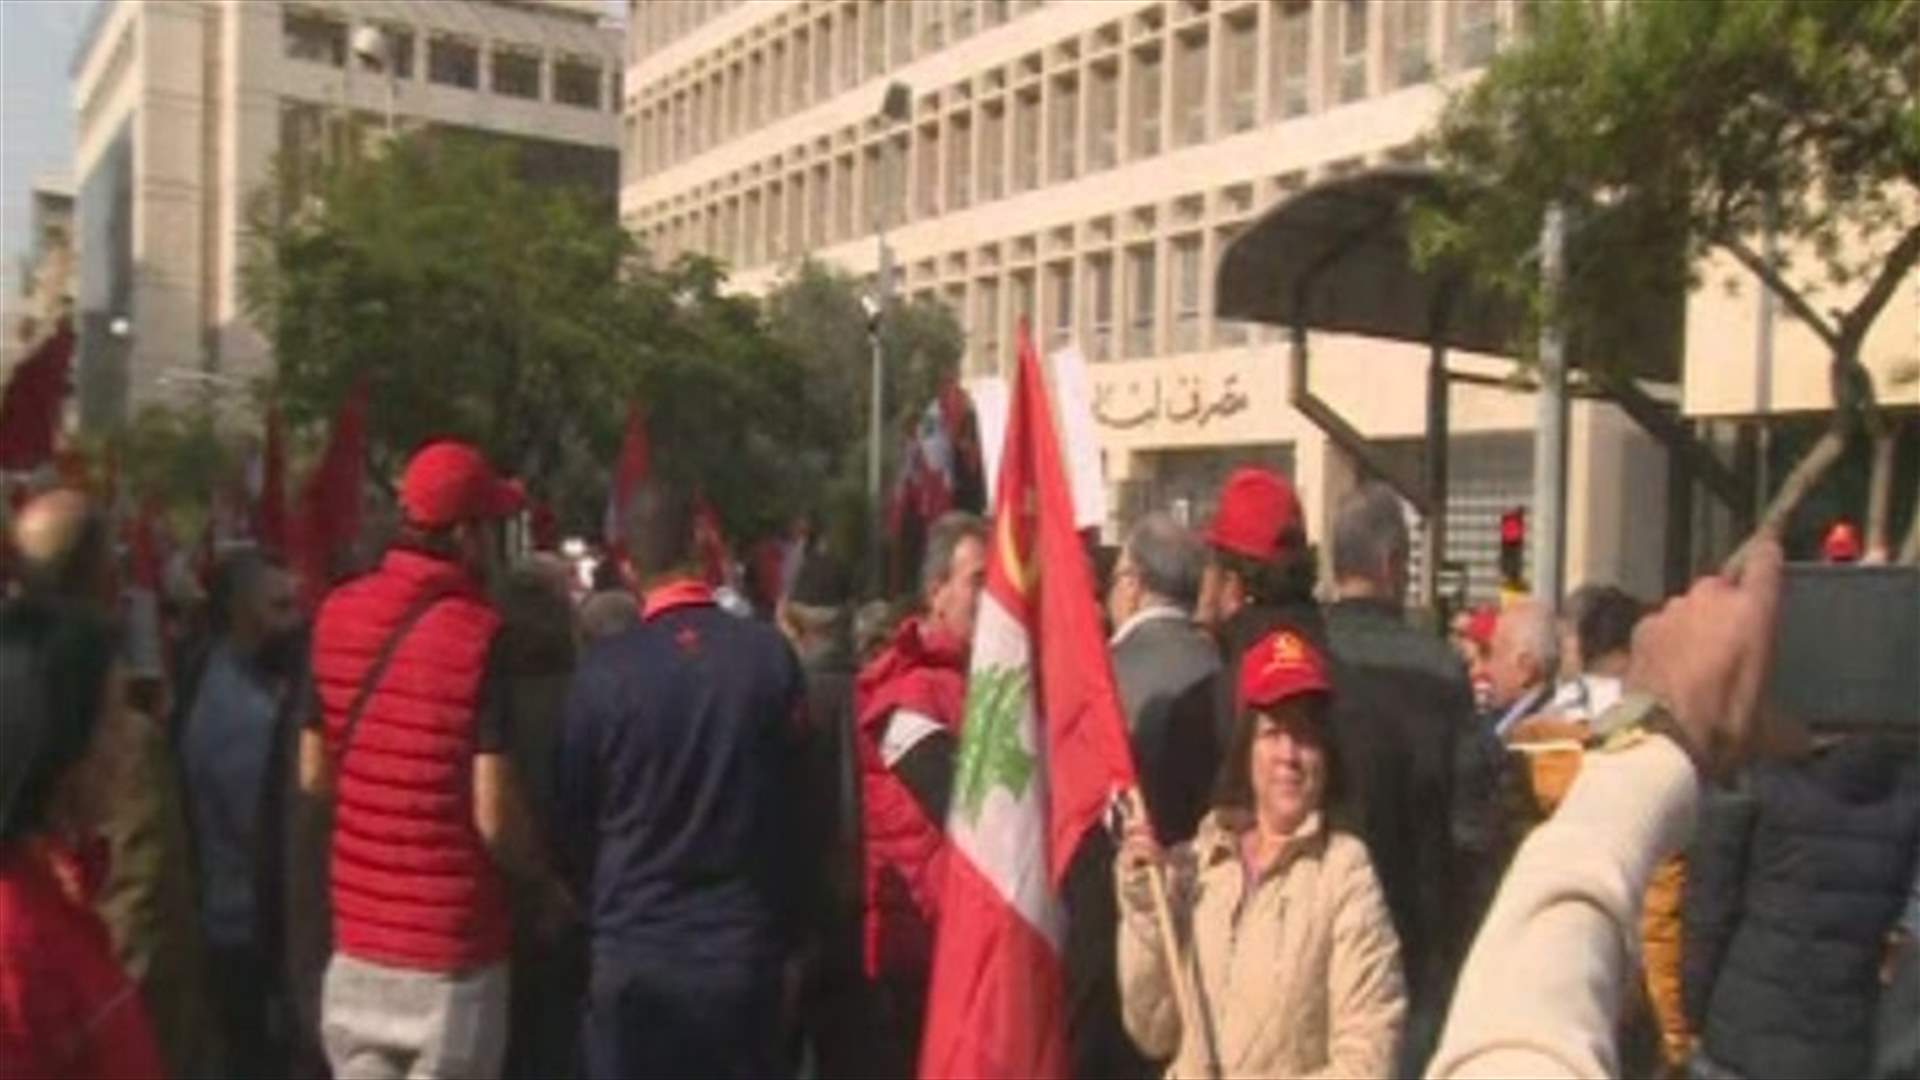 Demonstration staged outside Lebanon’s Central Bank